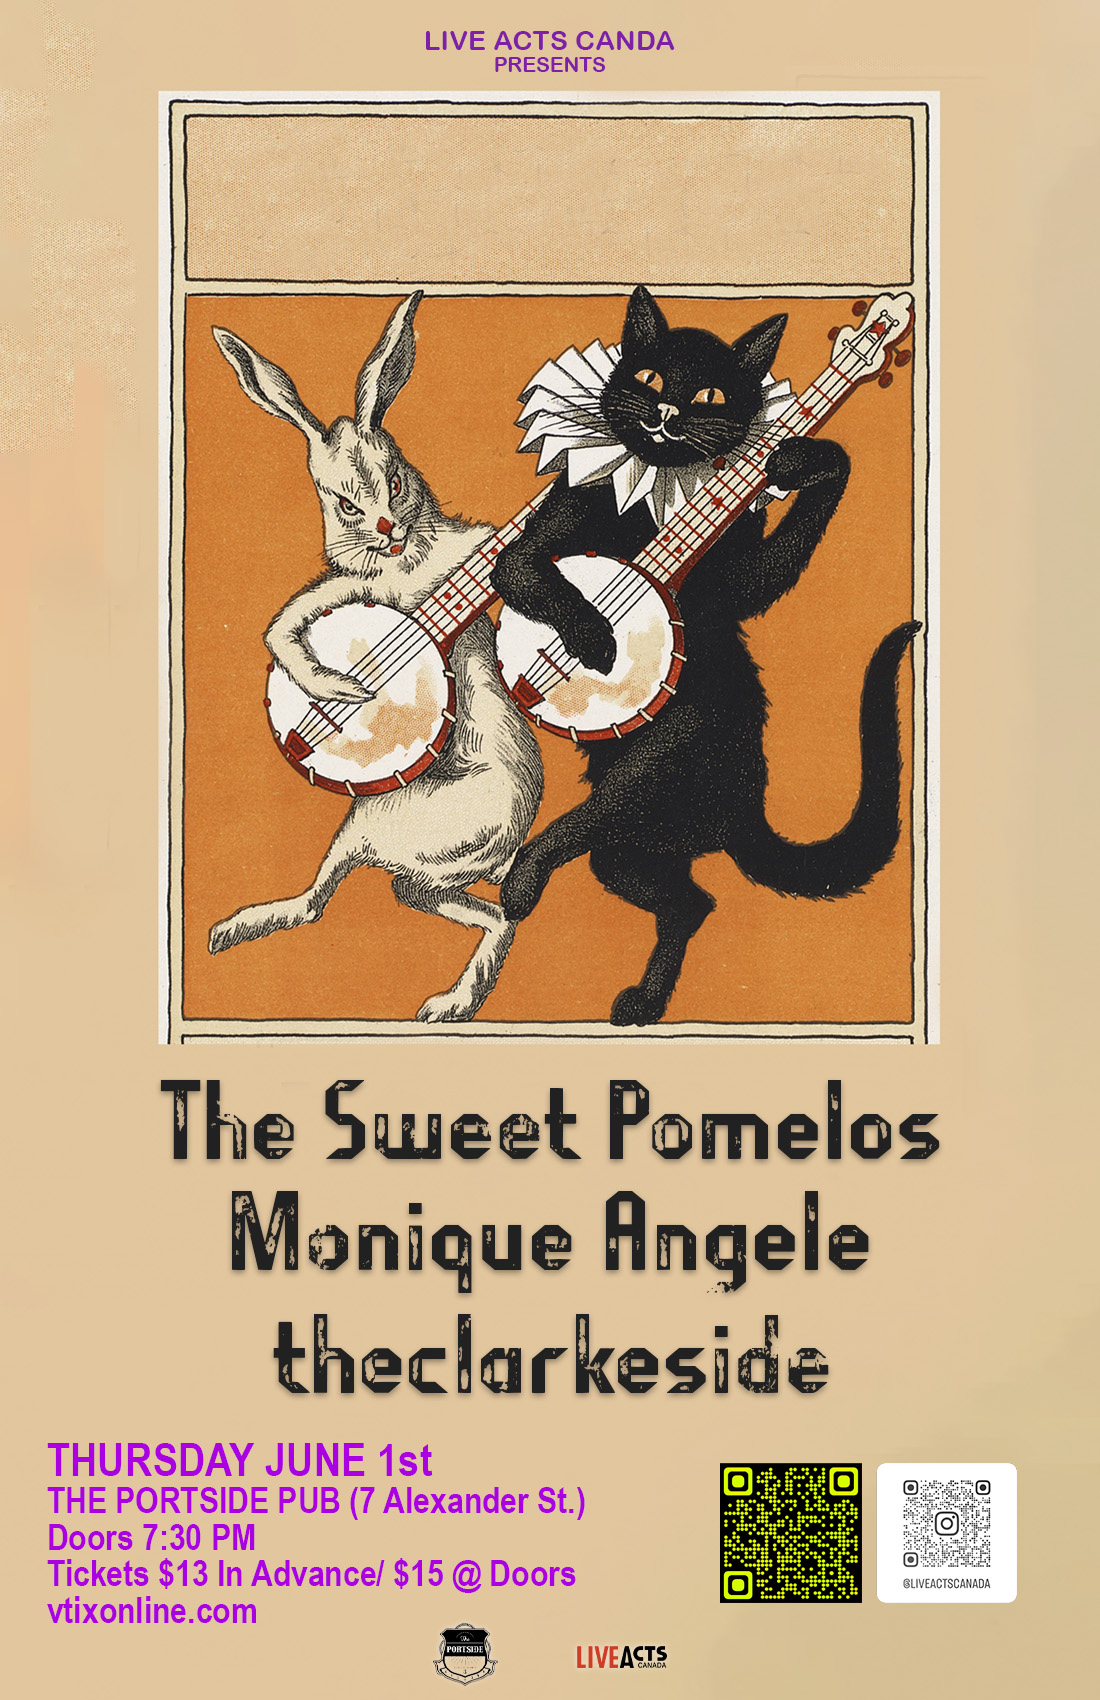 The Sweet Pomelos with Special Guests Monique Angele and theclarkeside